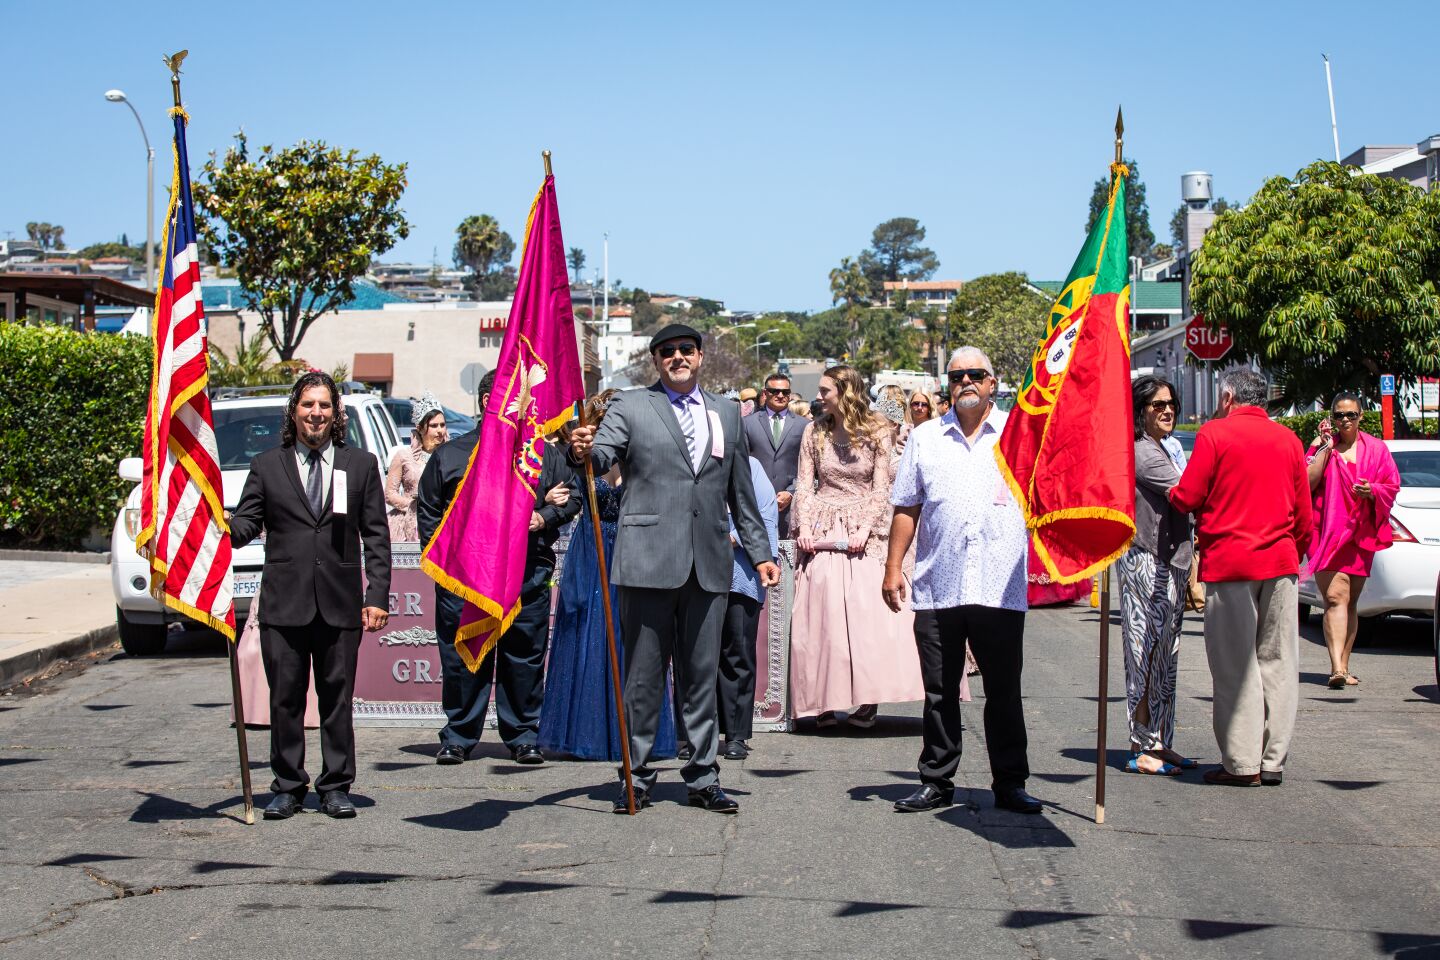 Jerry Balelo, Jose Virissimo and Manuel Virissimo carry the flags for the commemoration of Festa do Espirito Santo (Feast of the Holy Spirit), which the Point Loma Portuguese community has been celebrating since 1910 in honor of Queen St. Isabel of Portugal.